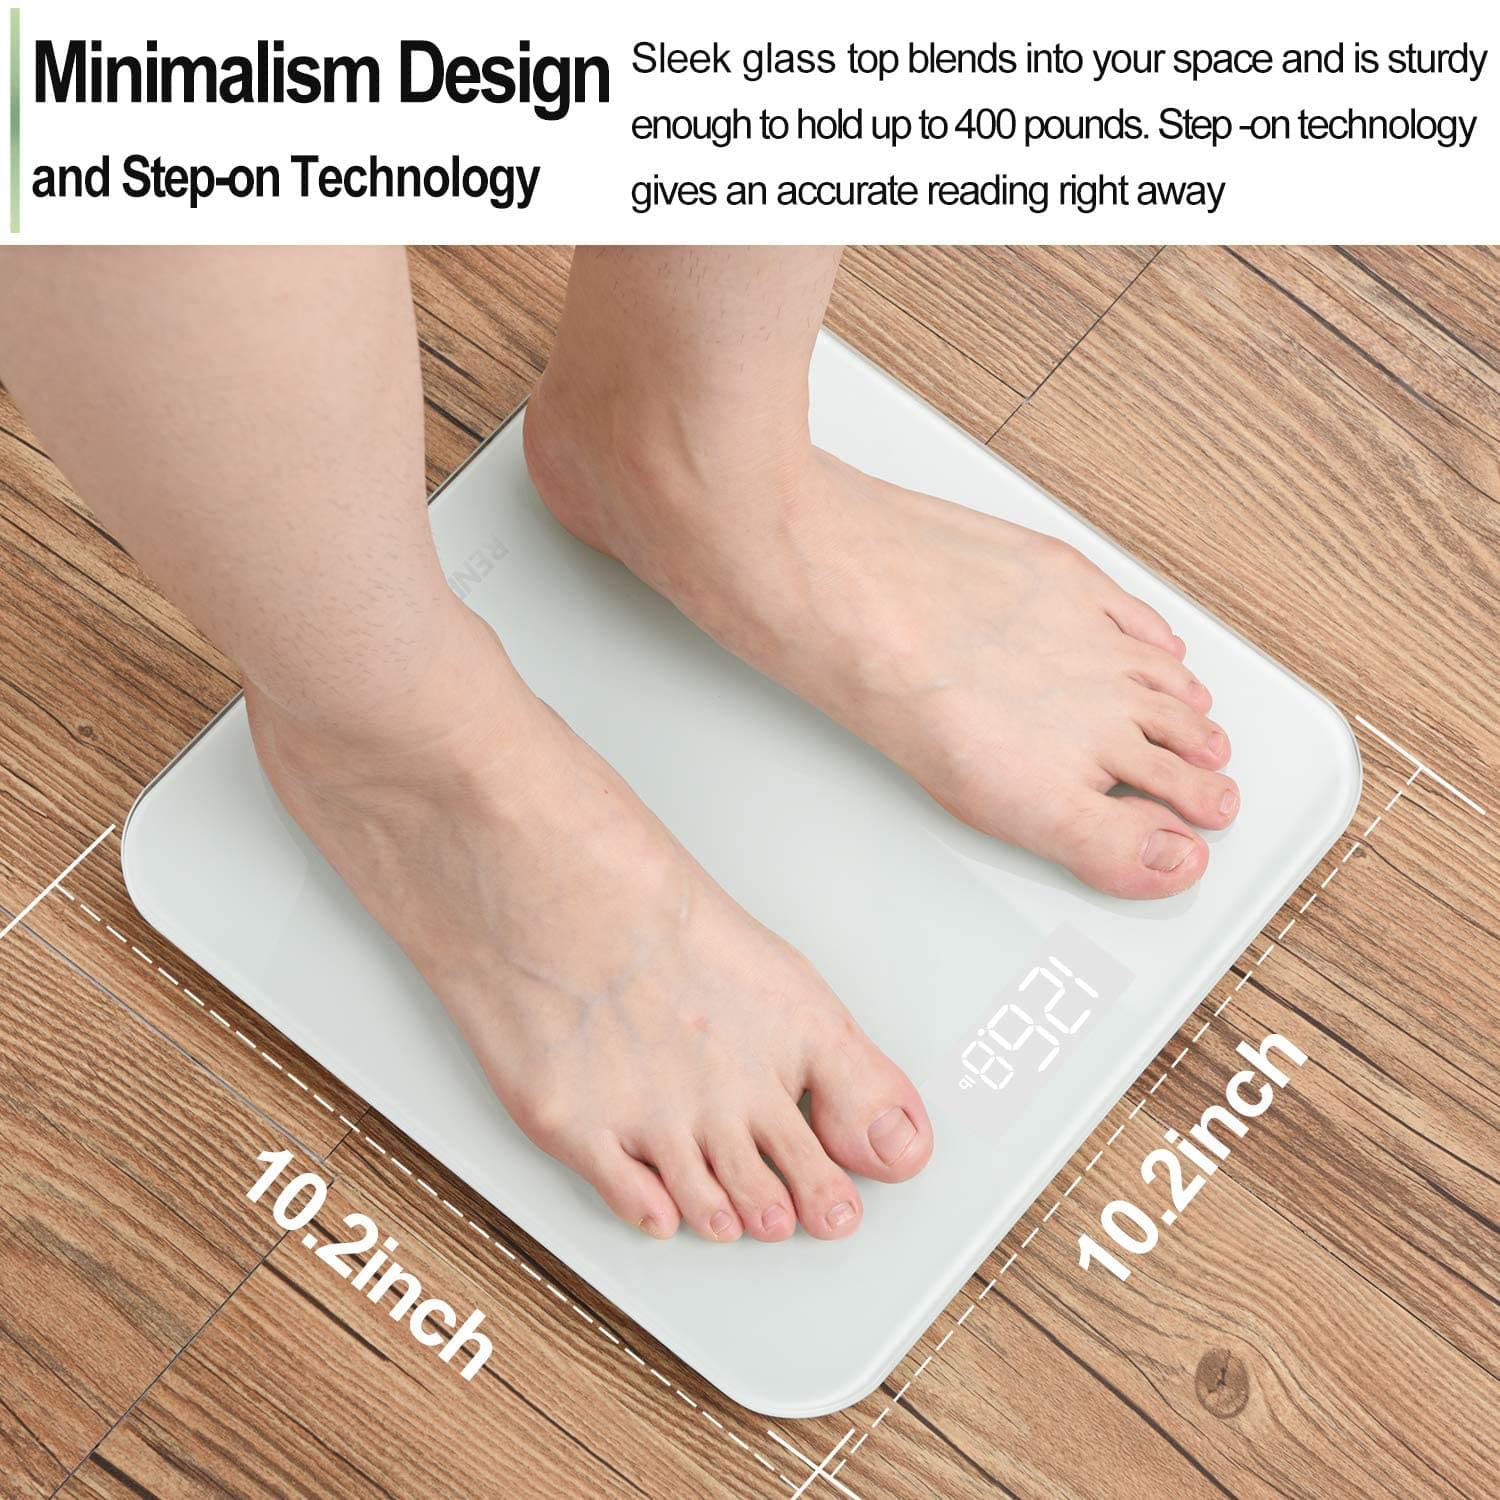 Trimmer Glass Digital Bathroom Bodyweight Weighing Scale for Home, Gym,  Fitness, Clear